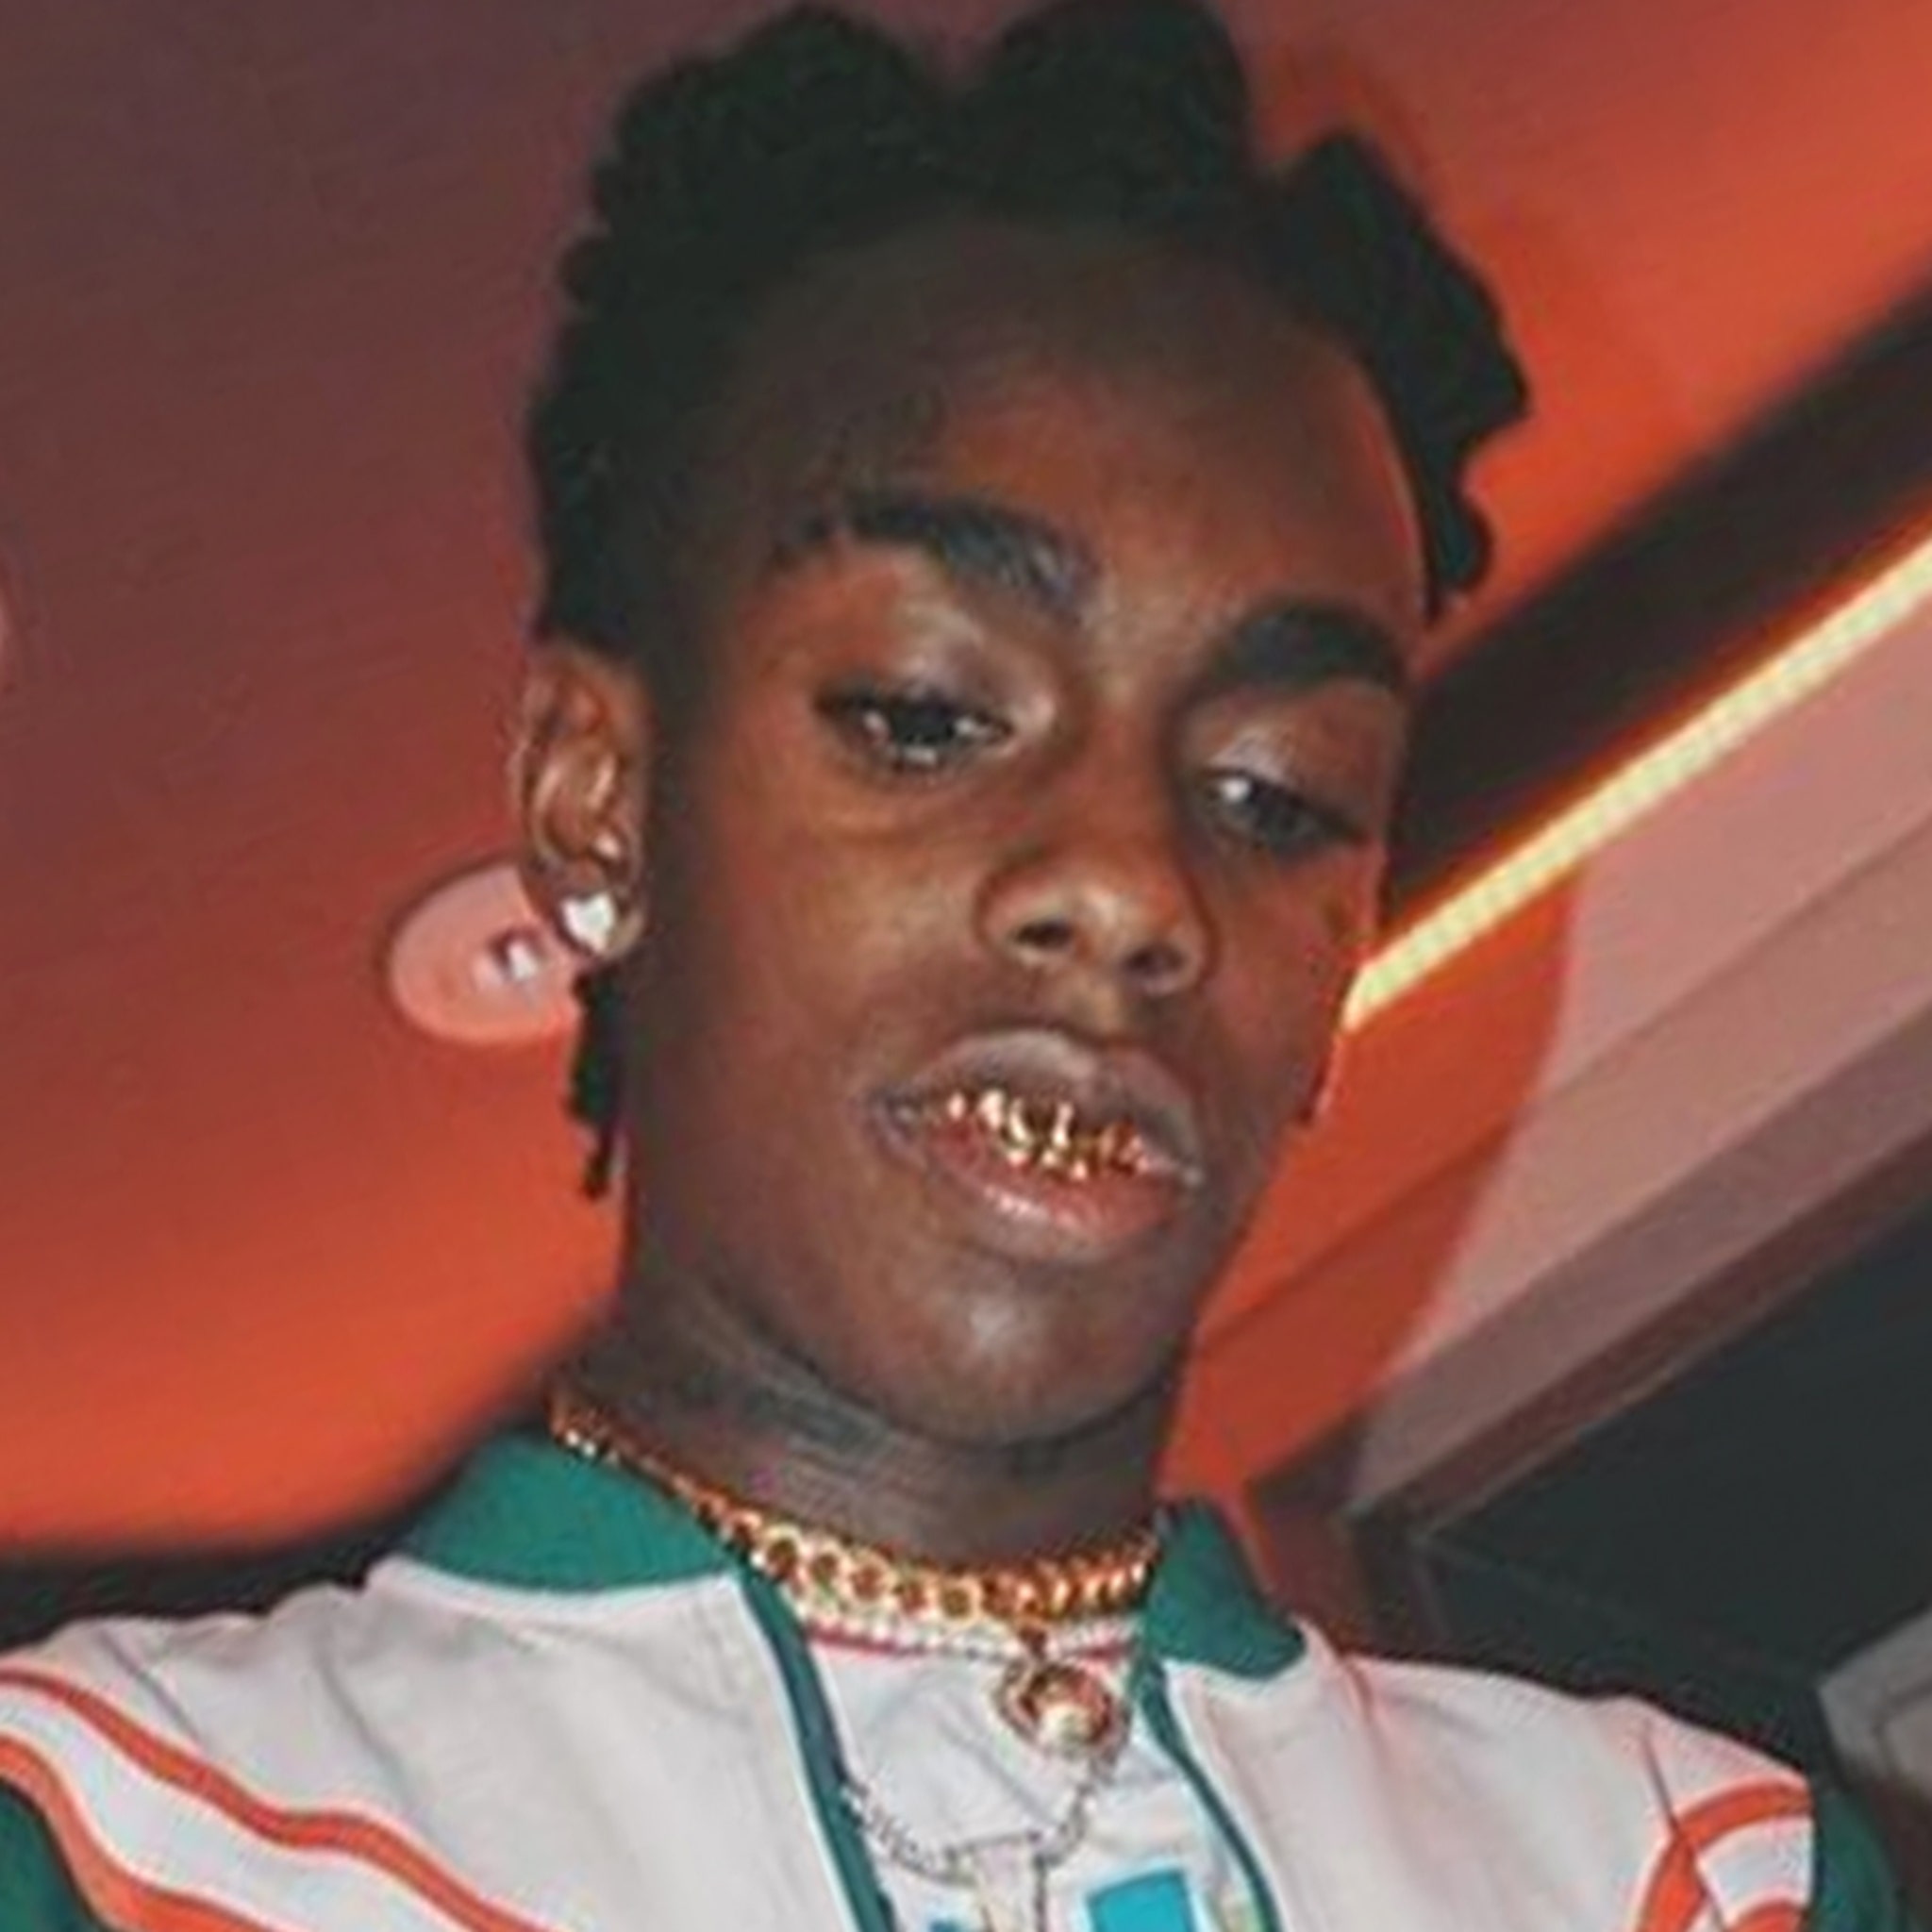 Ynw Melly Wants To Be Released On Bail In Double Murder Case